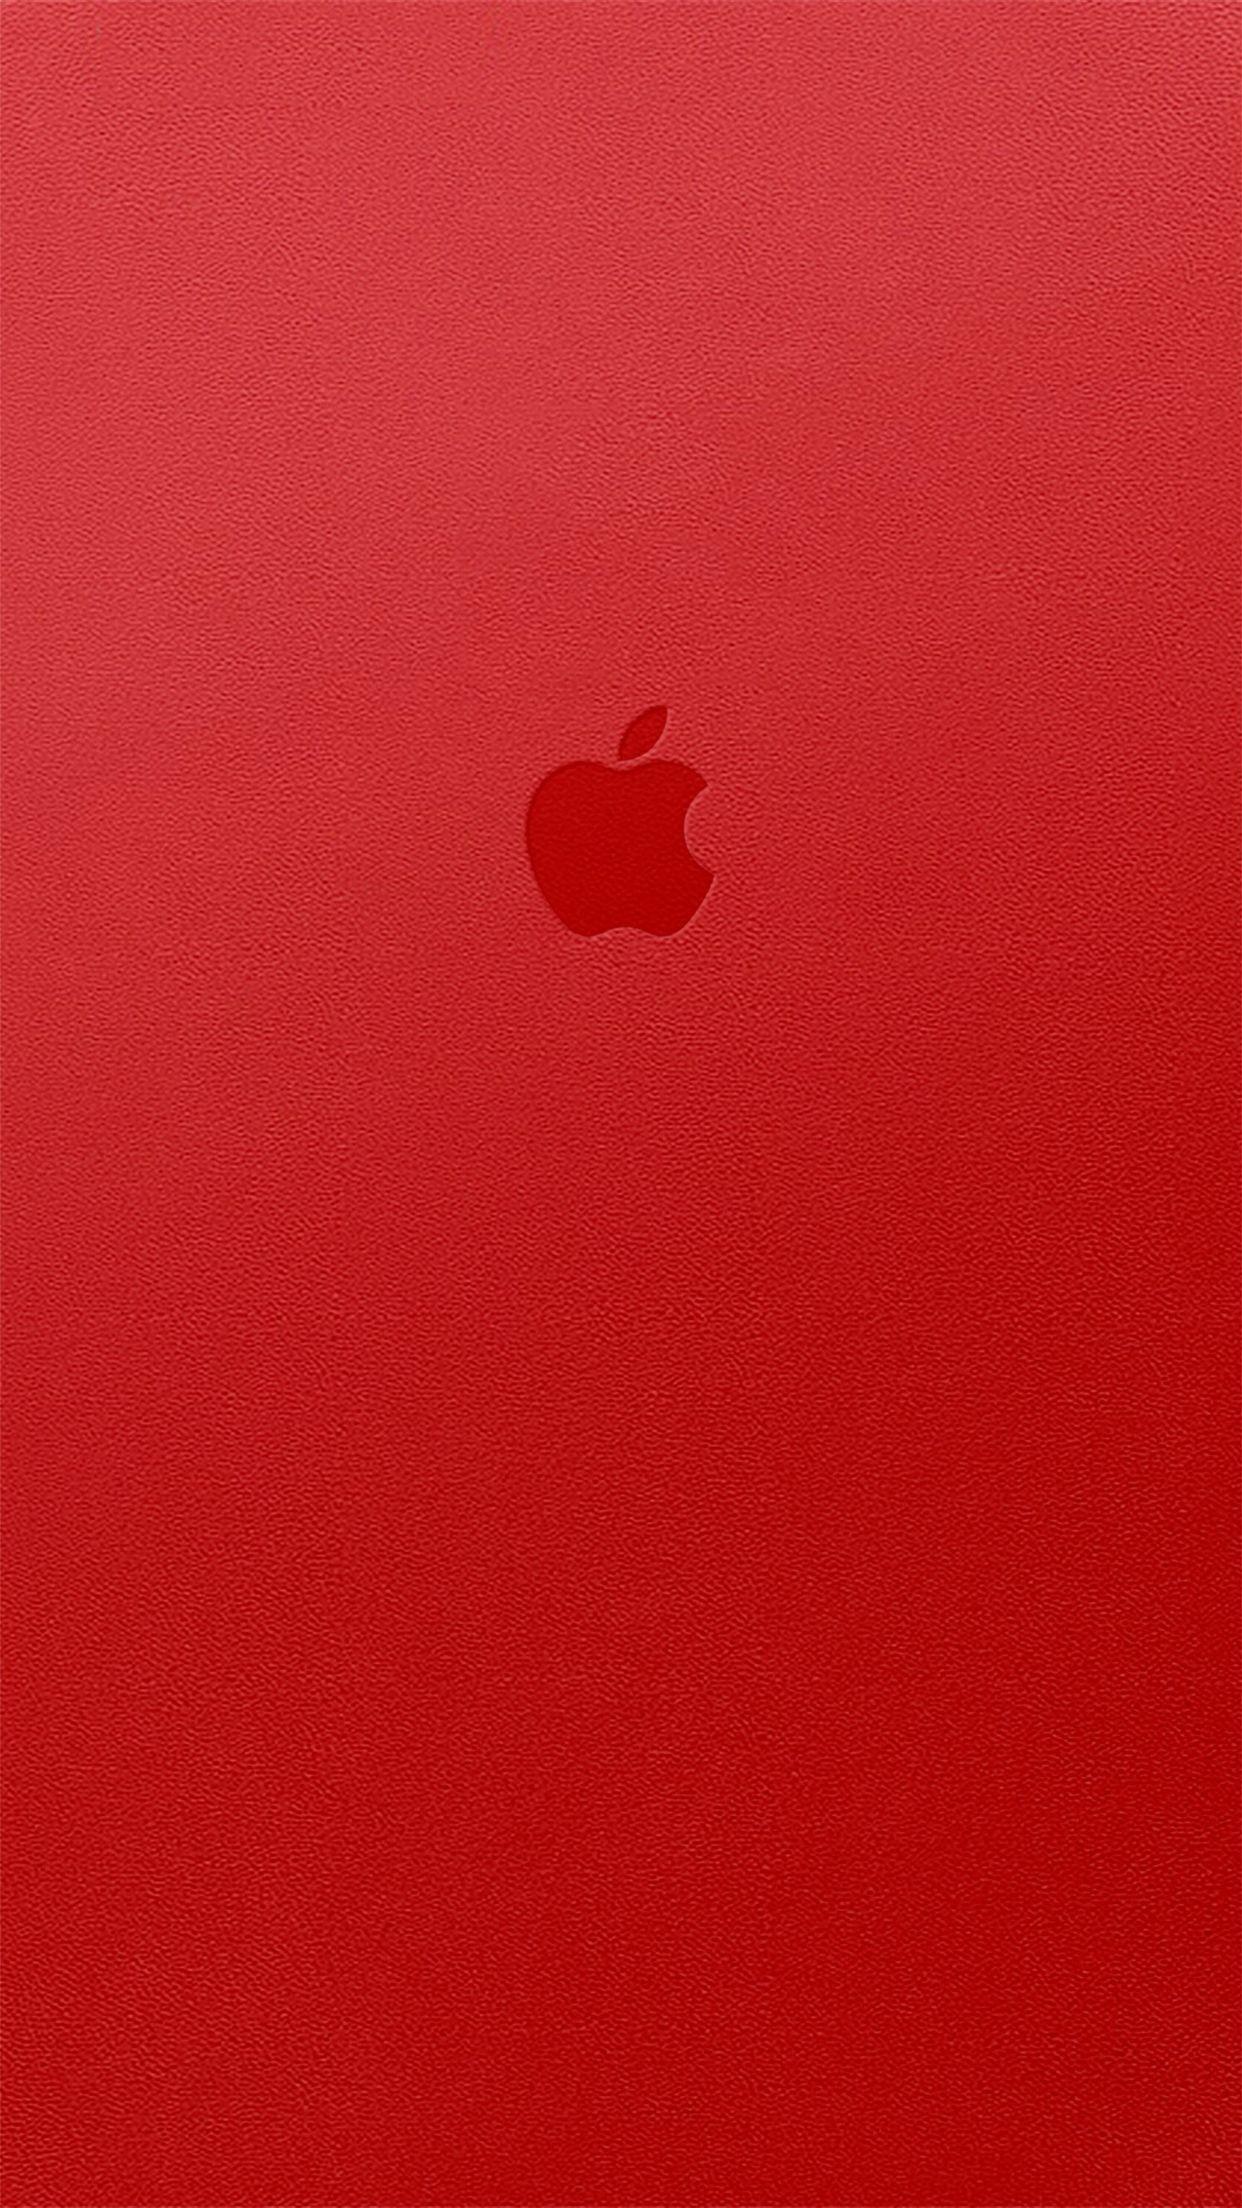 Red Apple Wallpapers 70 images